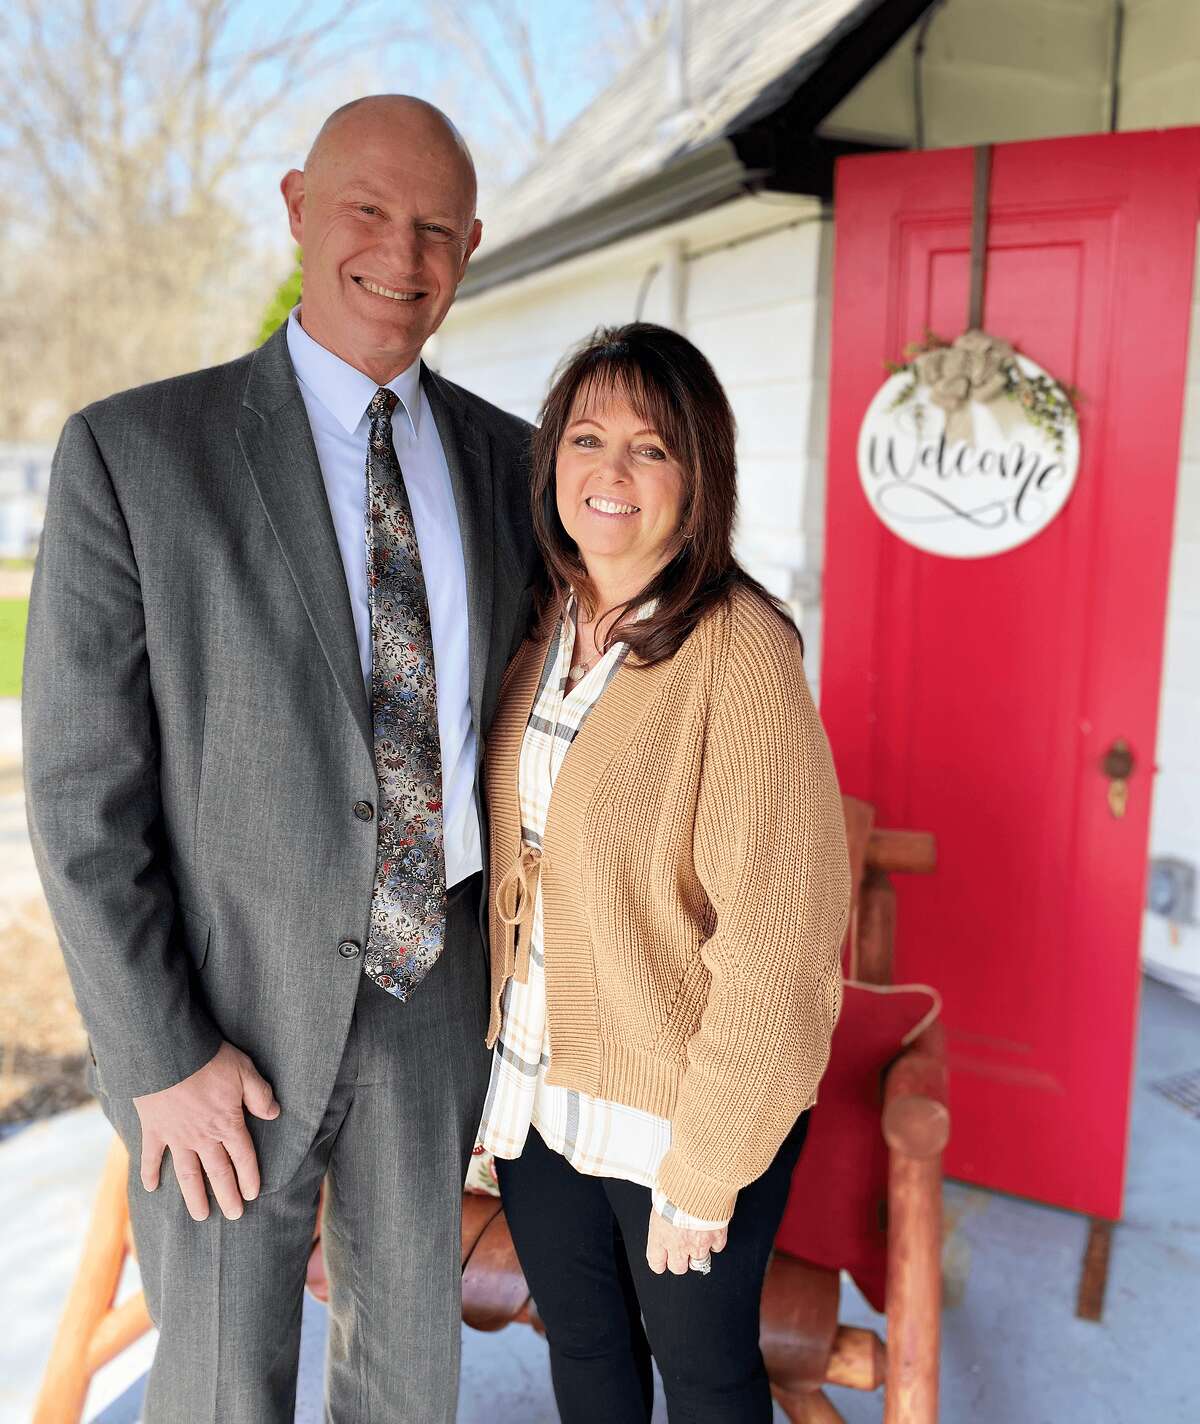 Craig and Lori Lang will chair Midland's Open Door annual fundraiser in November.